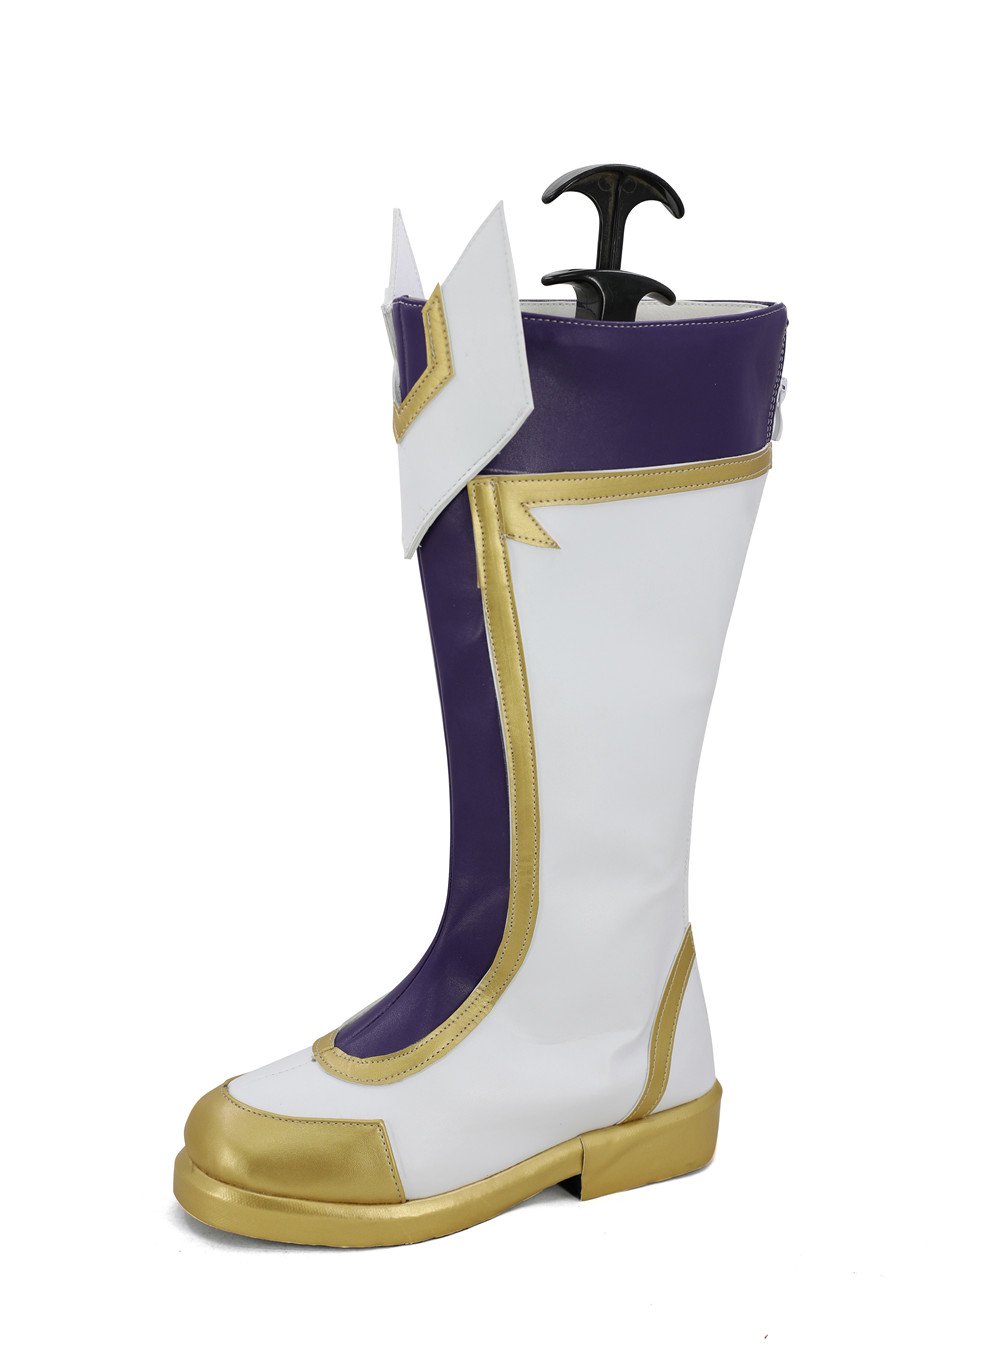 League of Legends Ezreal Star Guardian Cosplay Shoes Boots